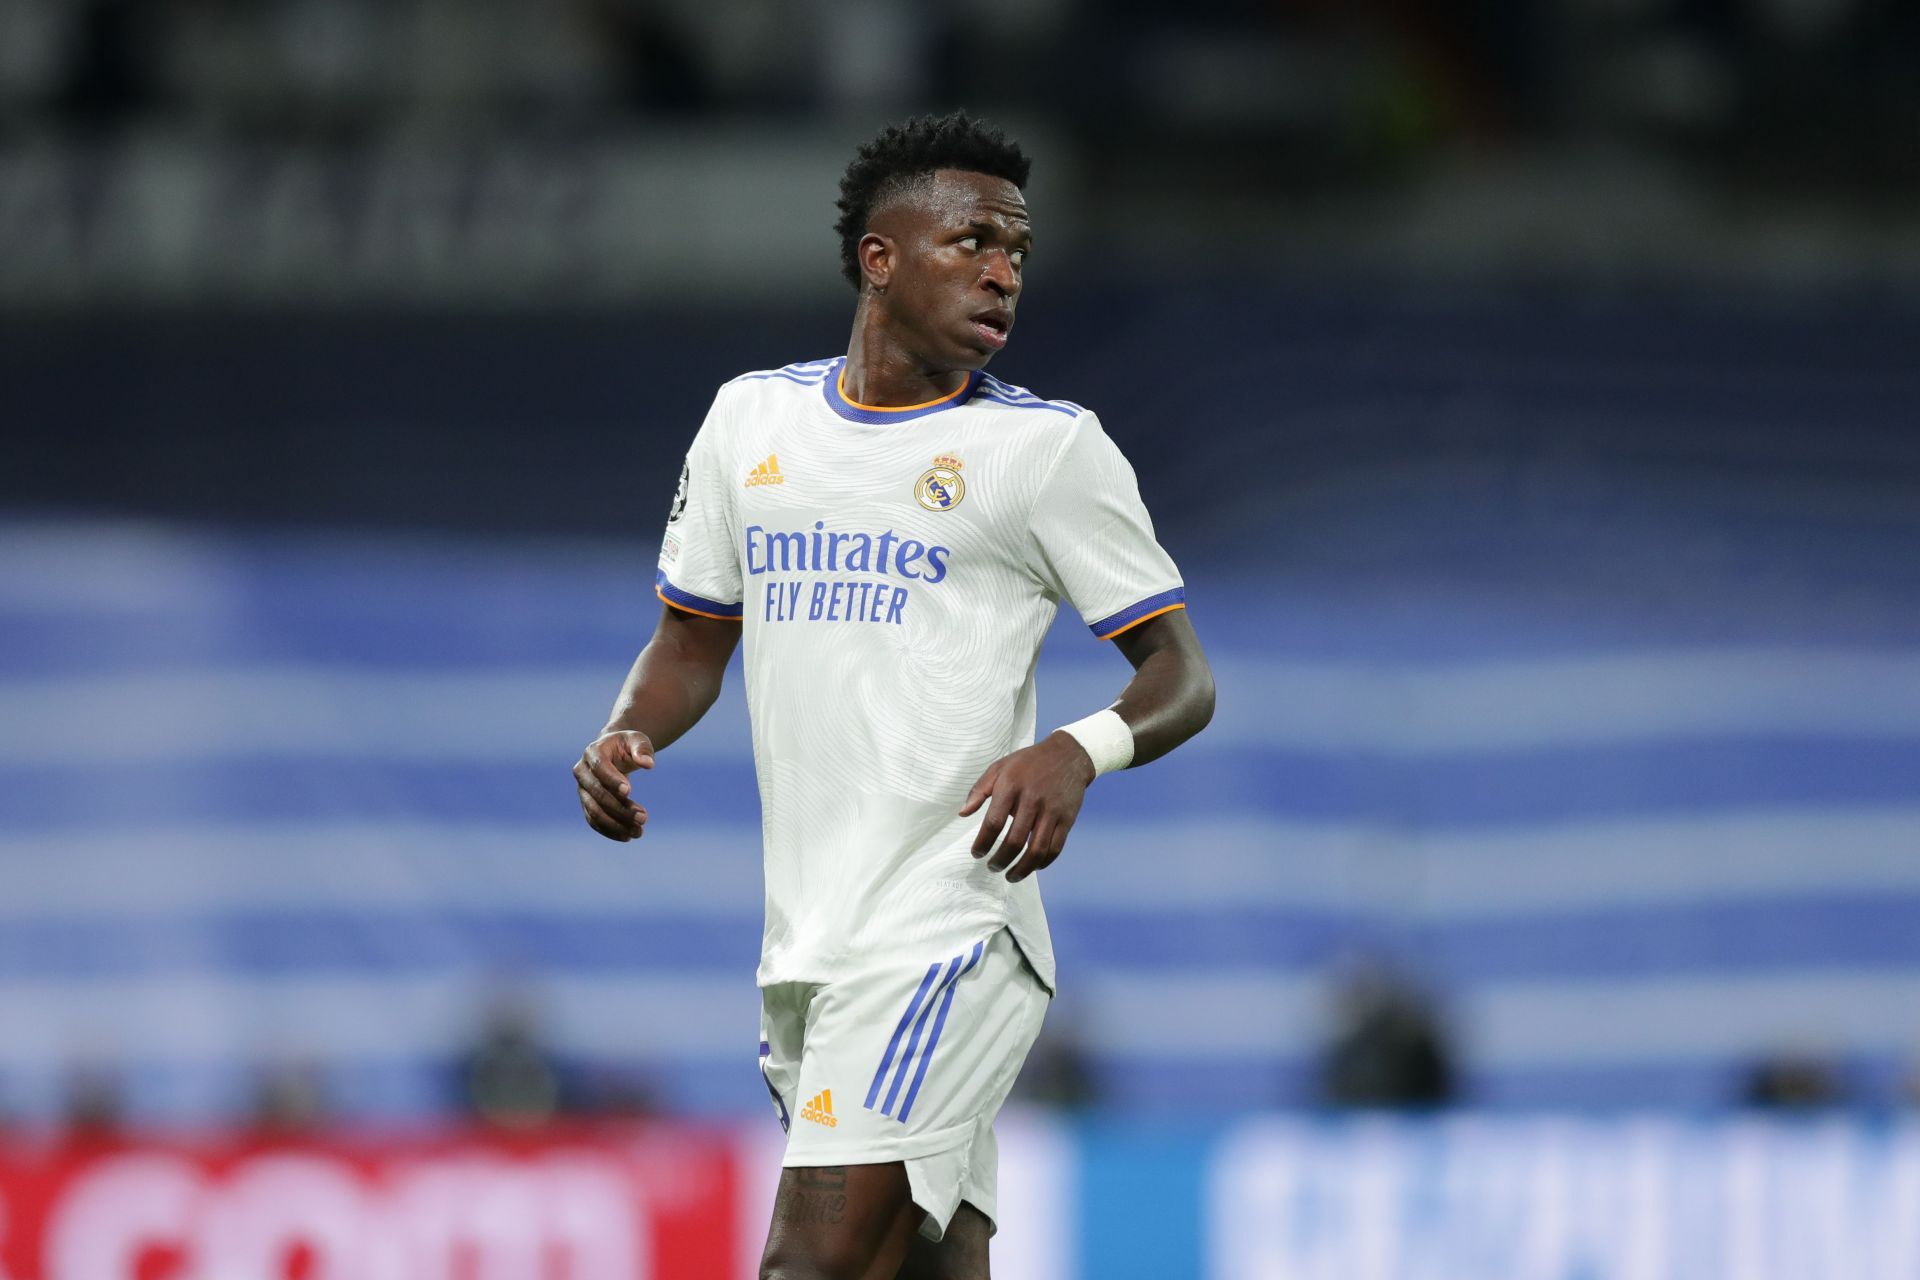 Vinicius Jr. has finally come of age at Real Madrid.